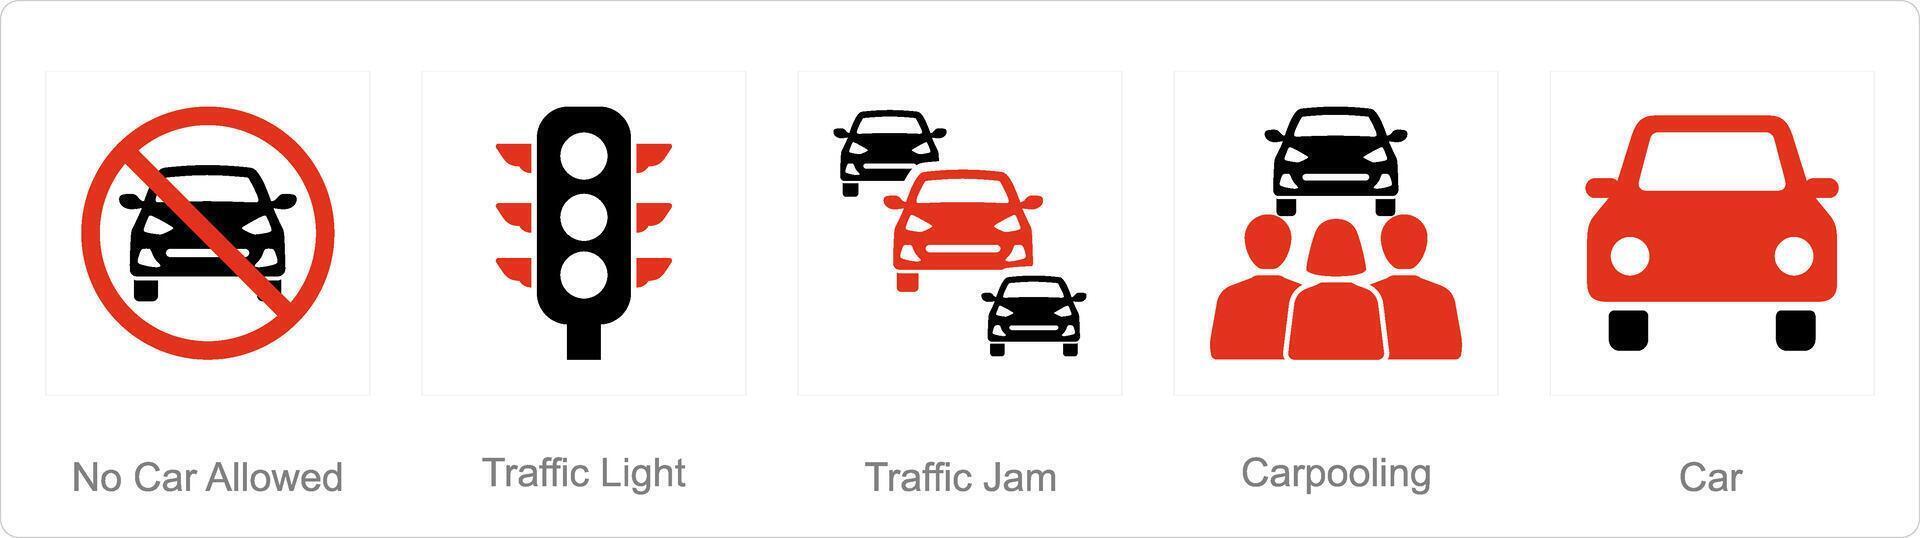 A set of 5 Car icons as no car allowed, traffic light, traffic jam vector